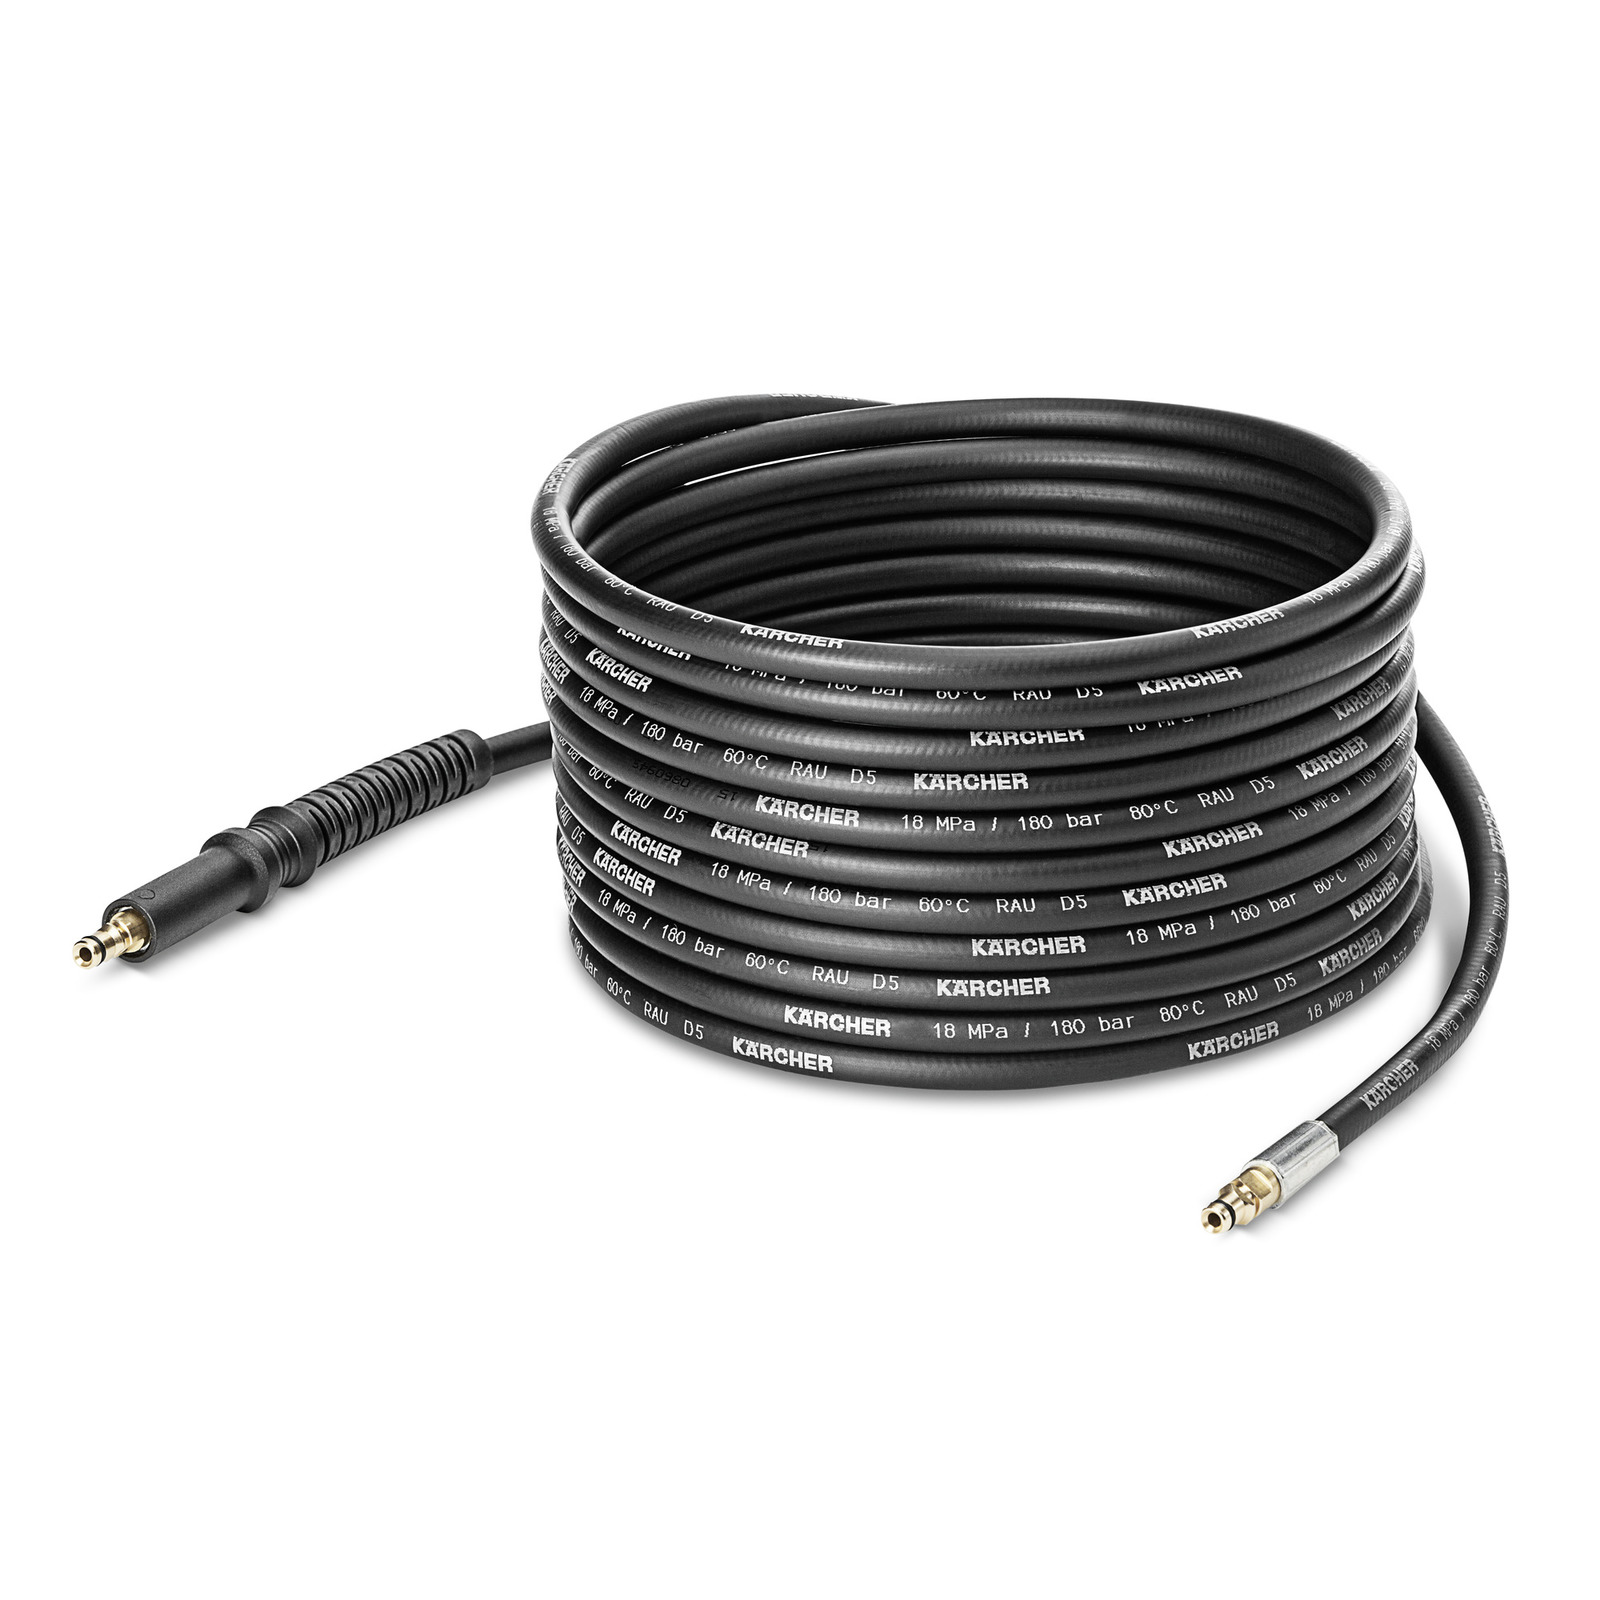 H 10 Q High-Pressure Hose with Quick Connect and for hose reel